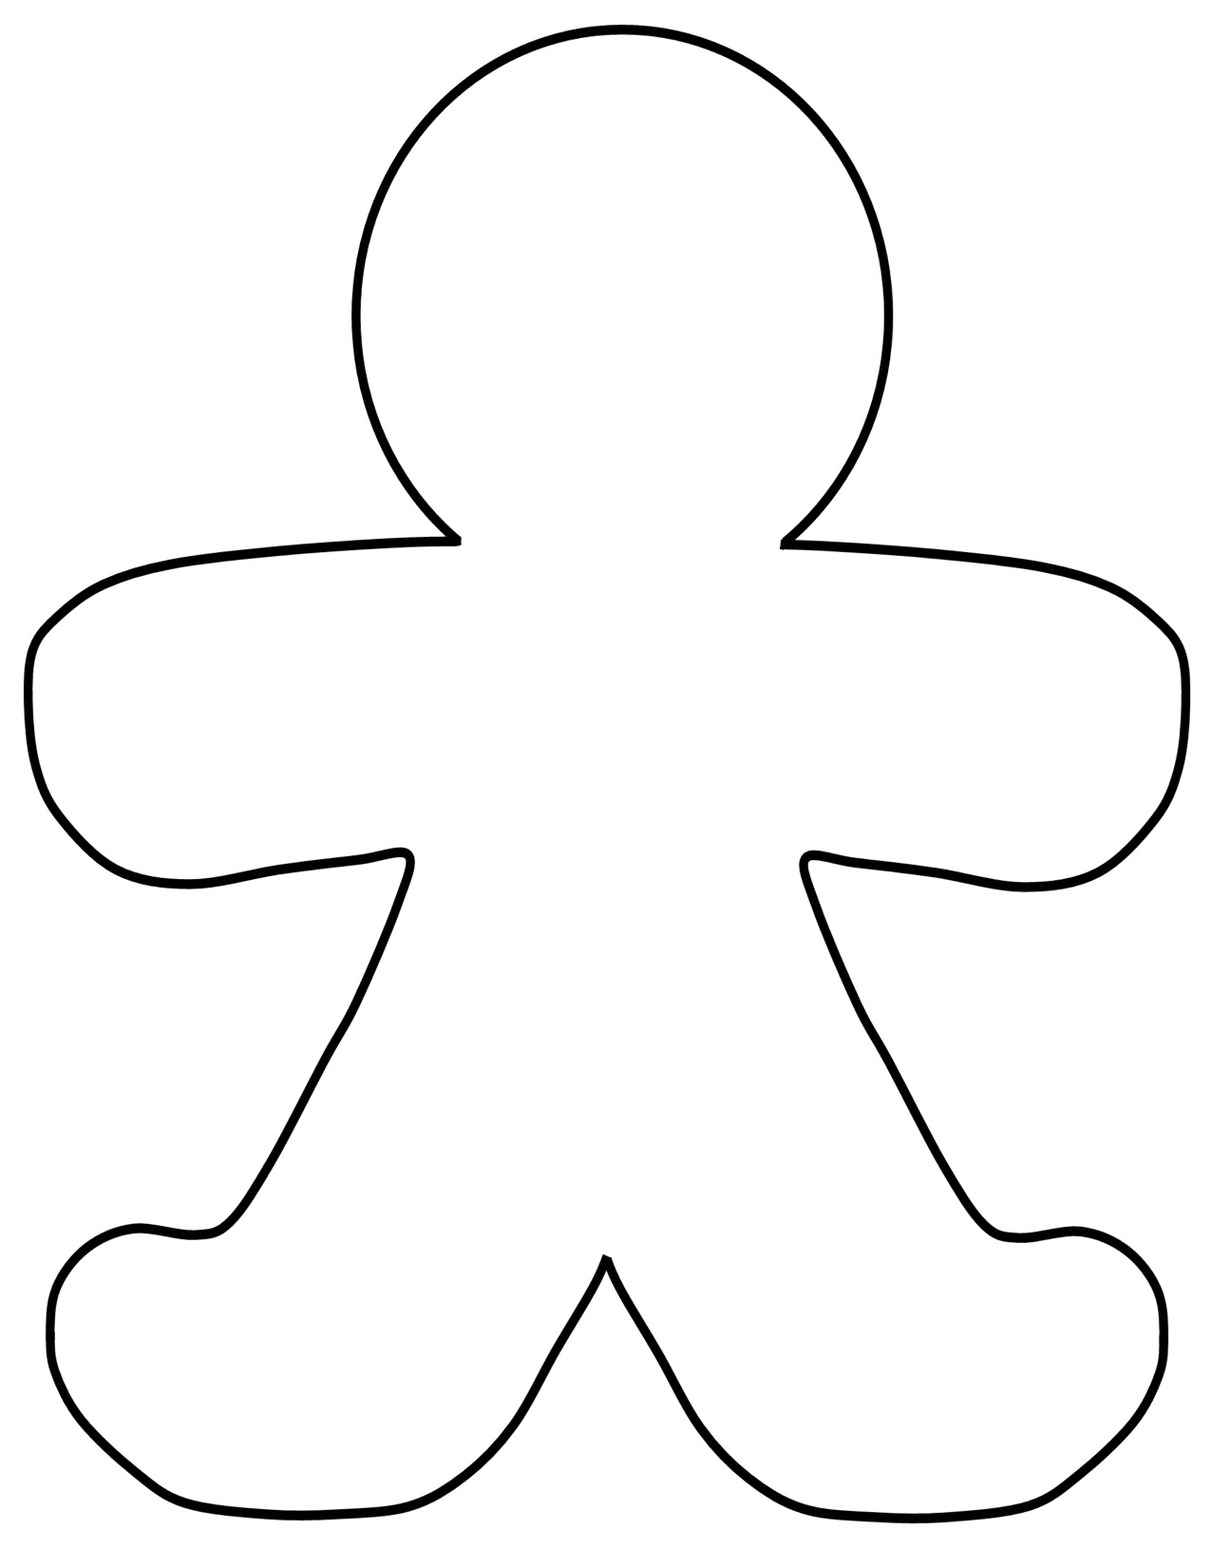 Outline Of A Person Template Clipart - Free to use Clip Art Resource